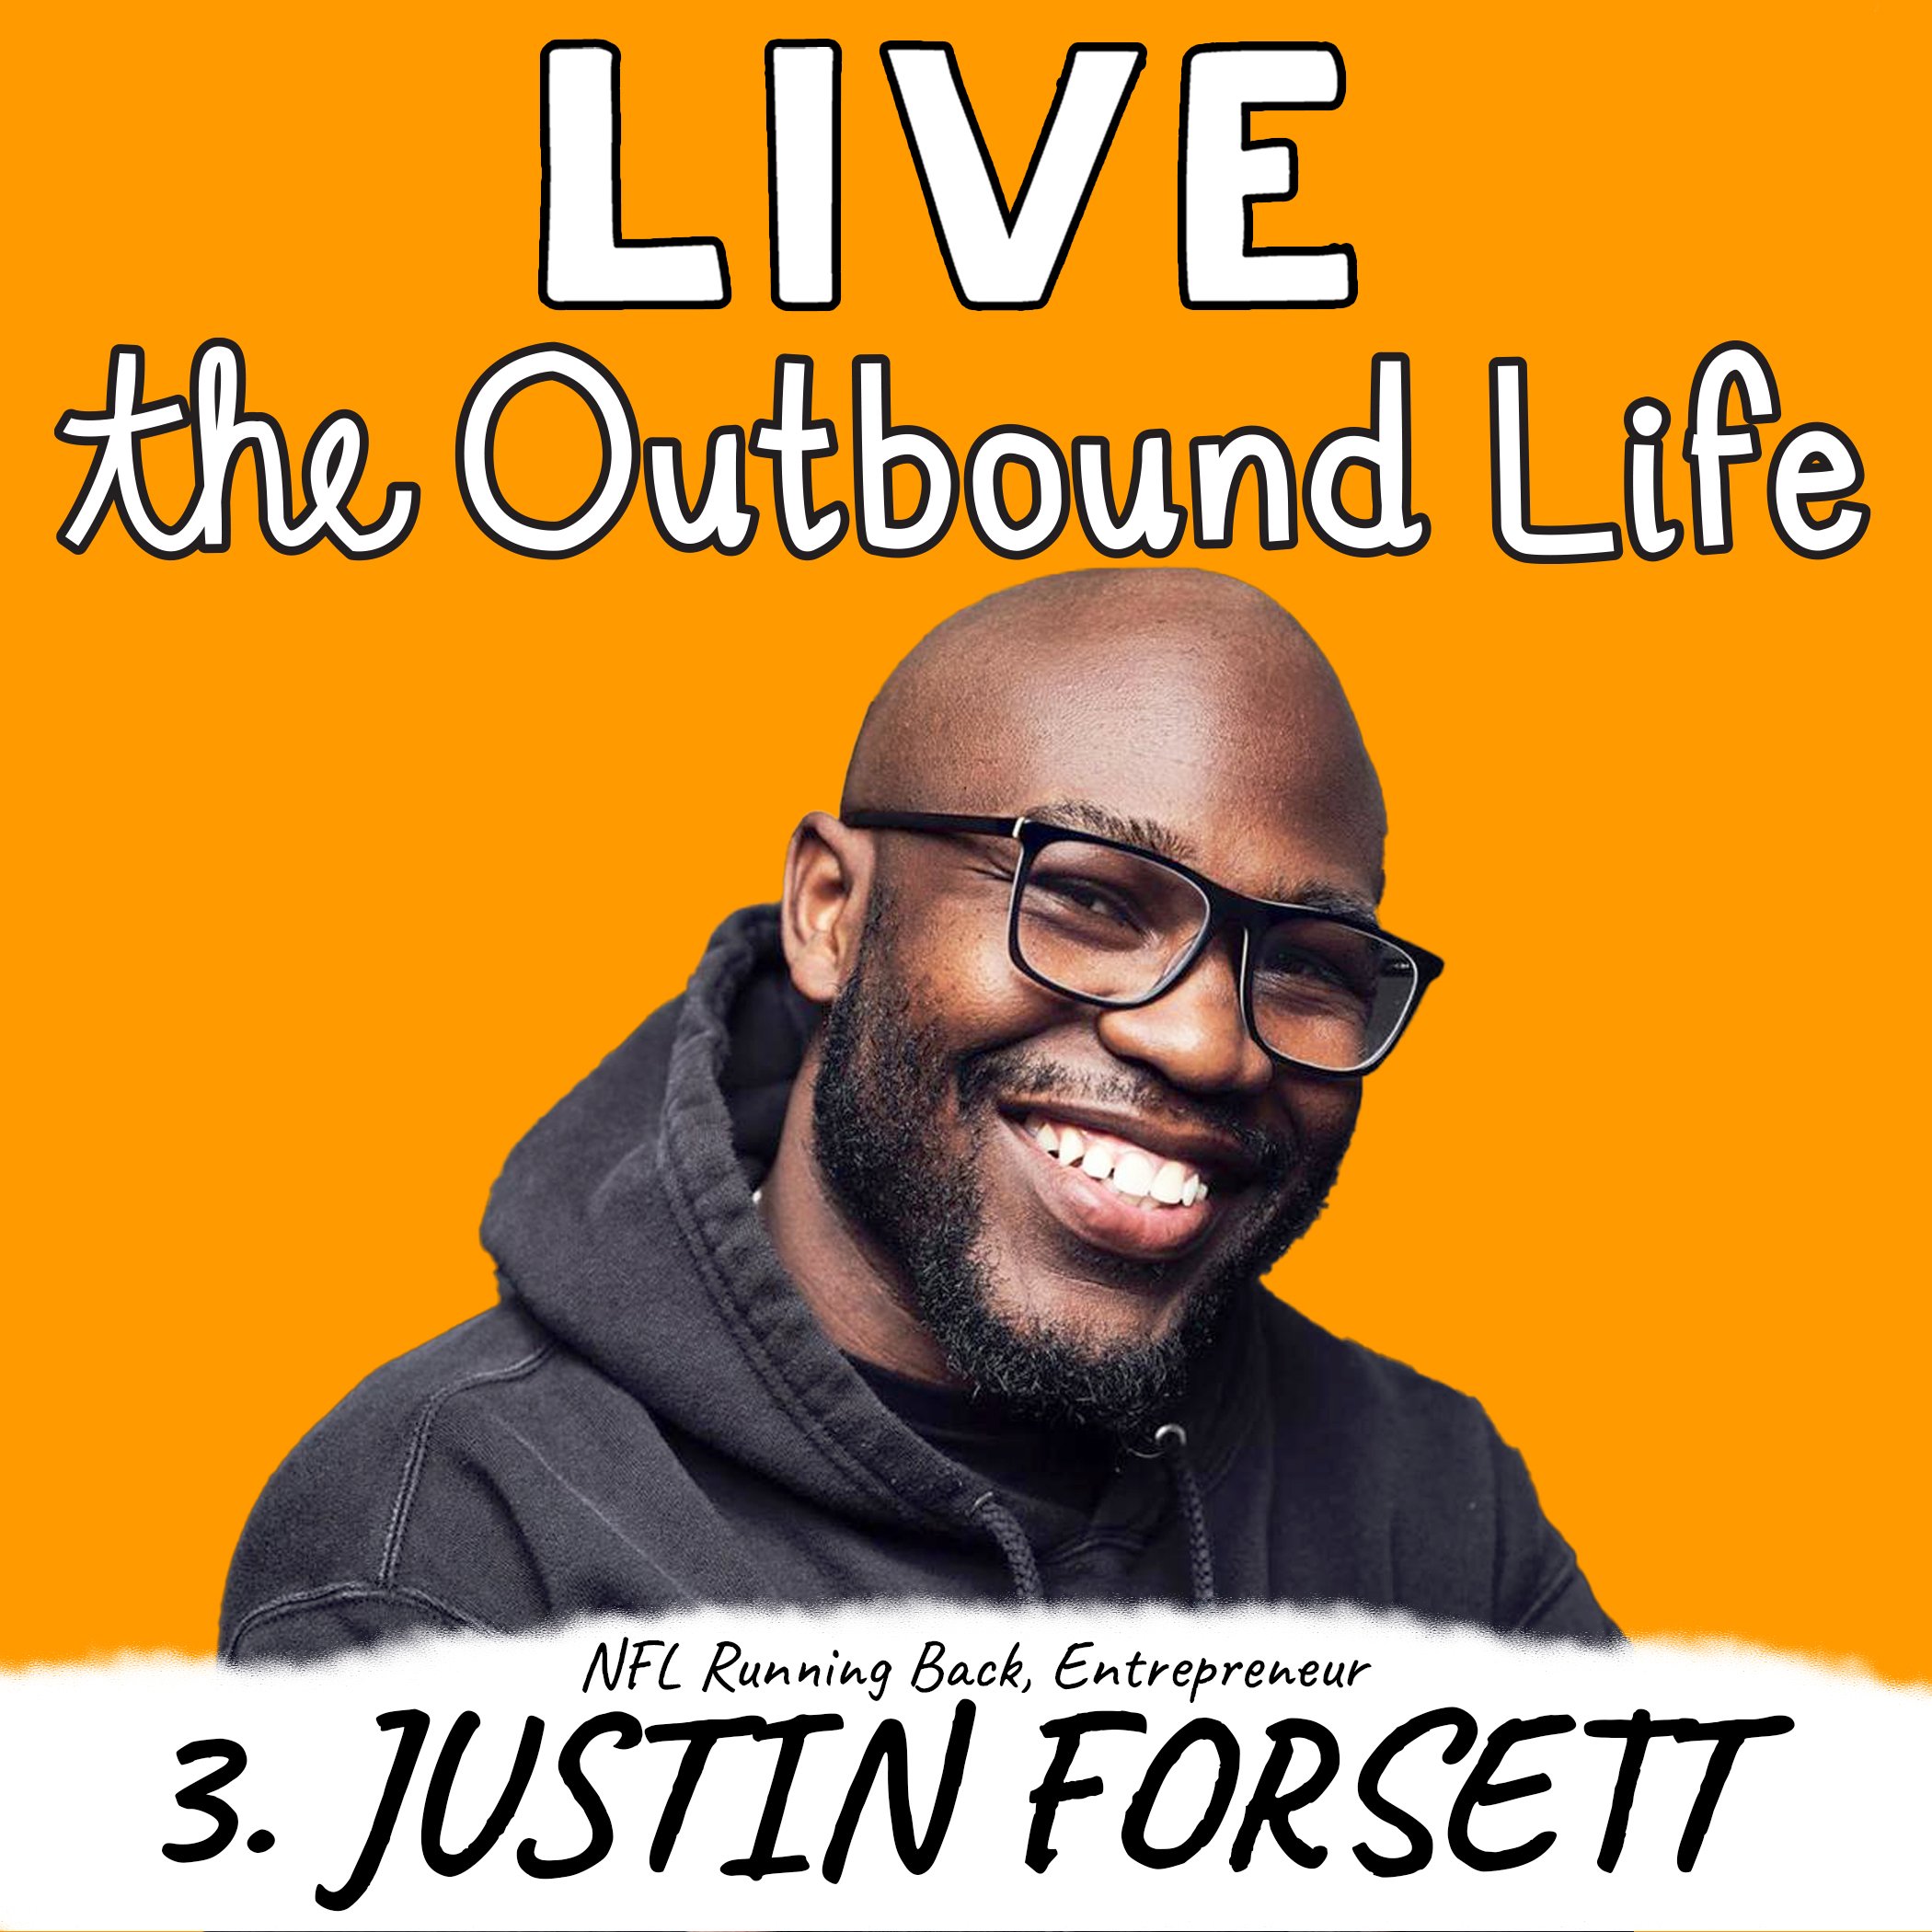 Justin Forsett Kyler McCormick Kody McCormick The Outbound Life podcast